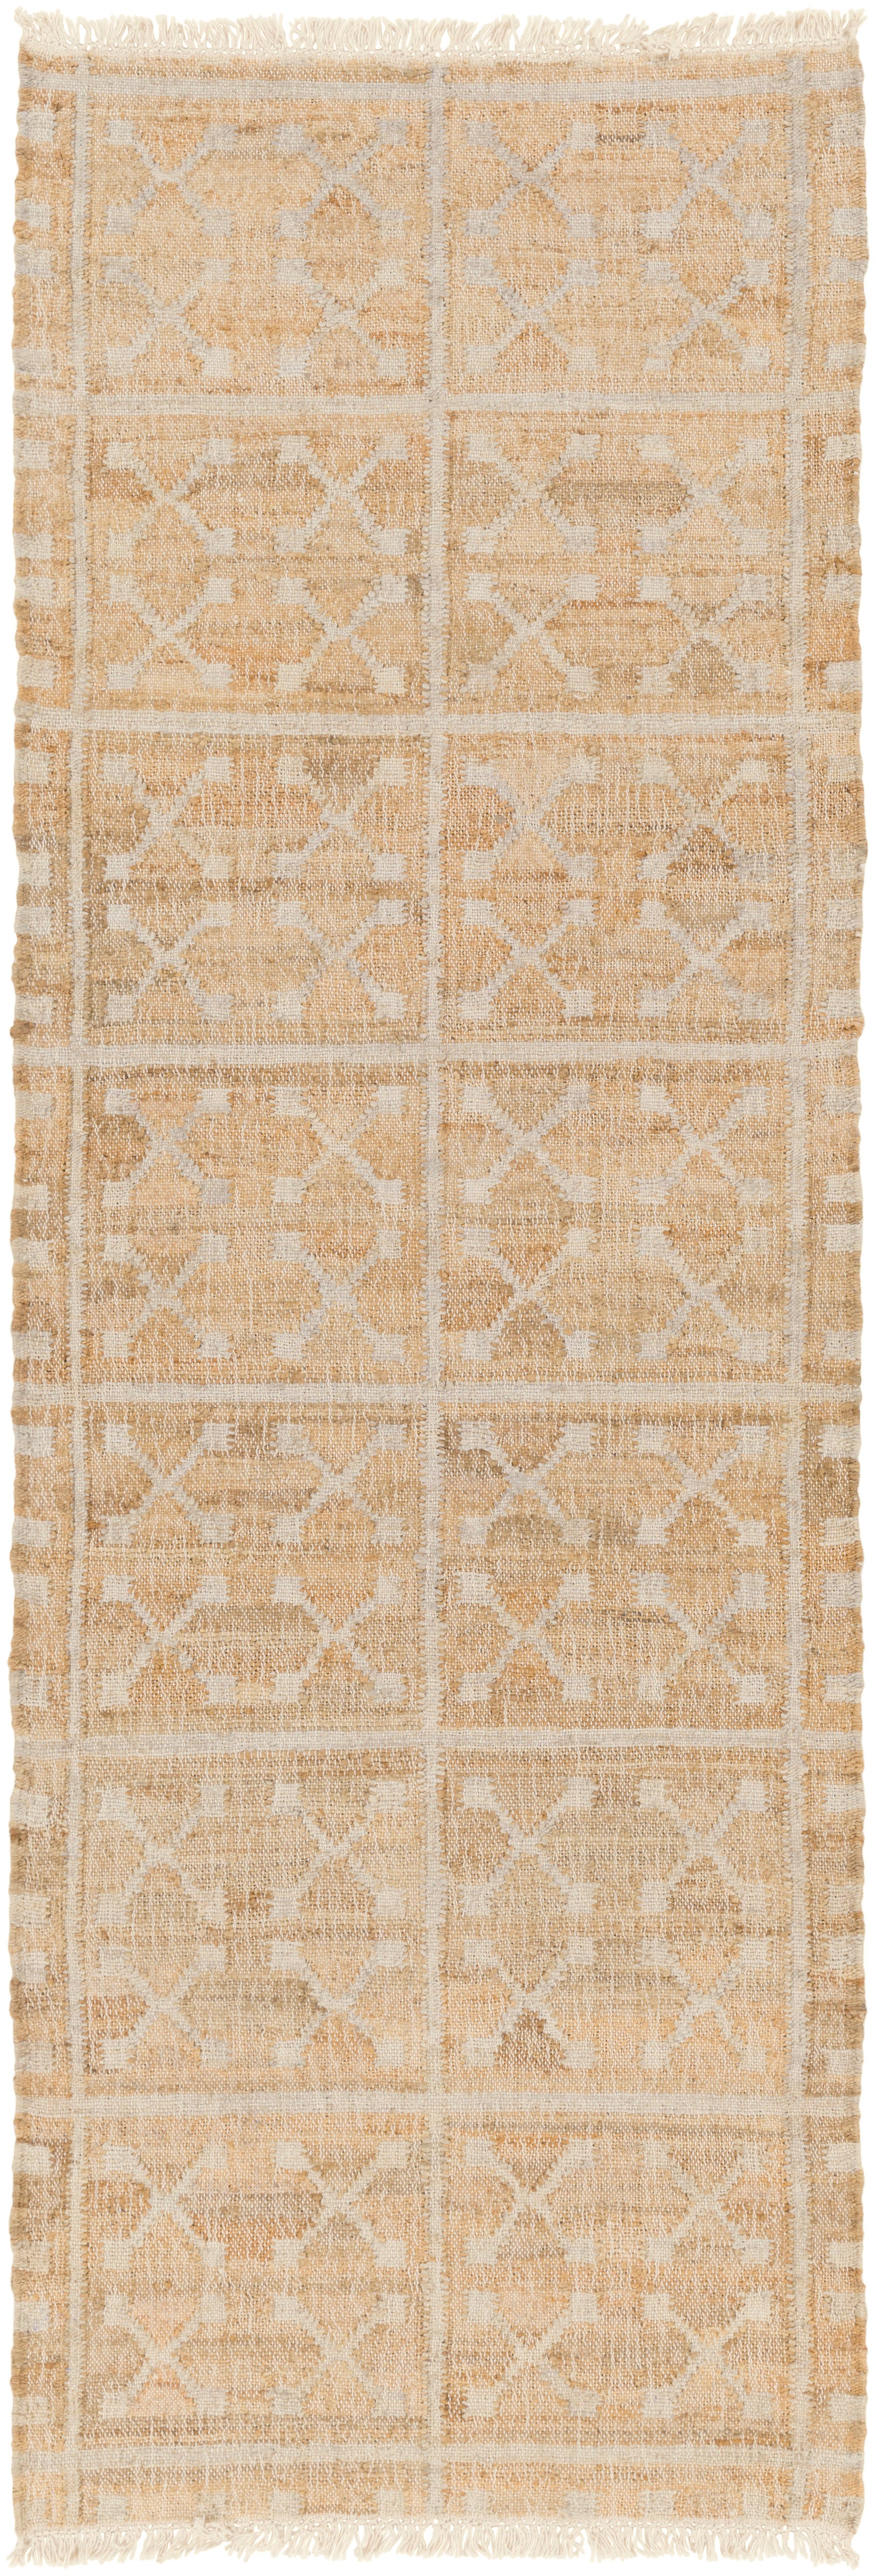 Surya Laural LRL6016 Neutral/Brown Natural Fiber and Texture Area Rug